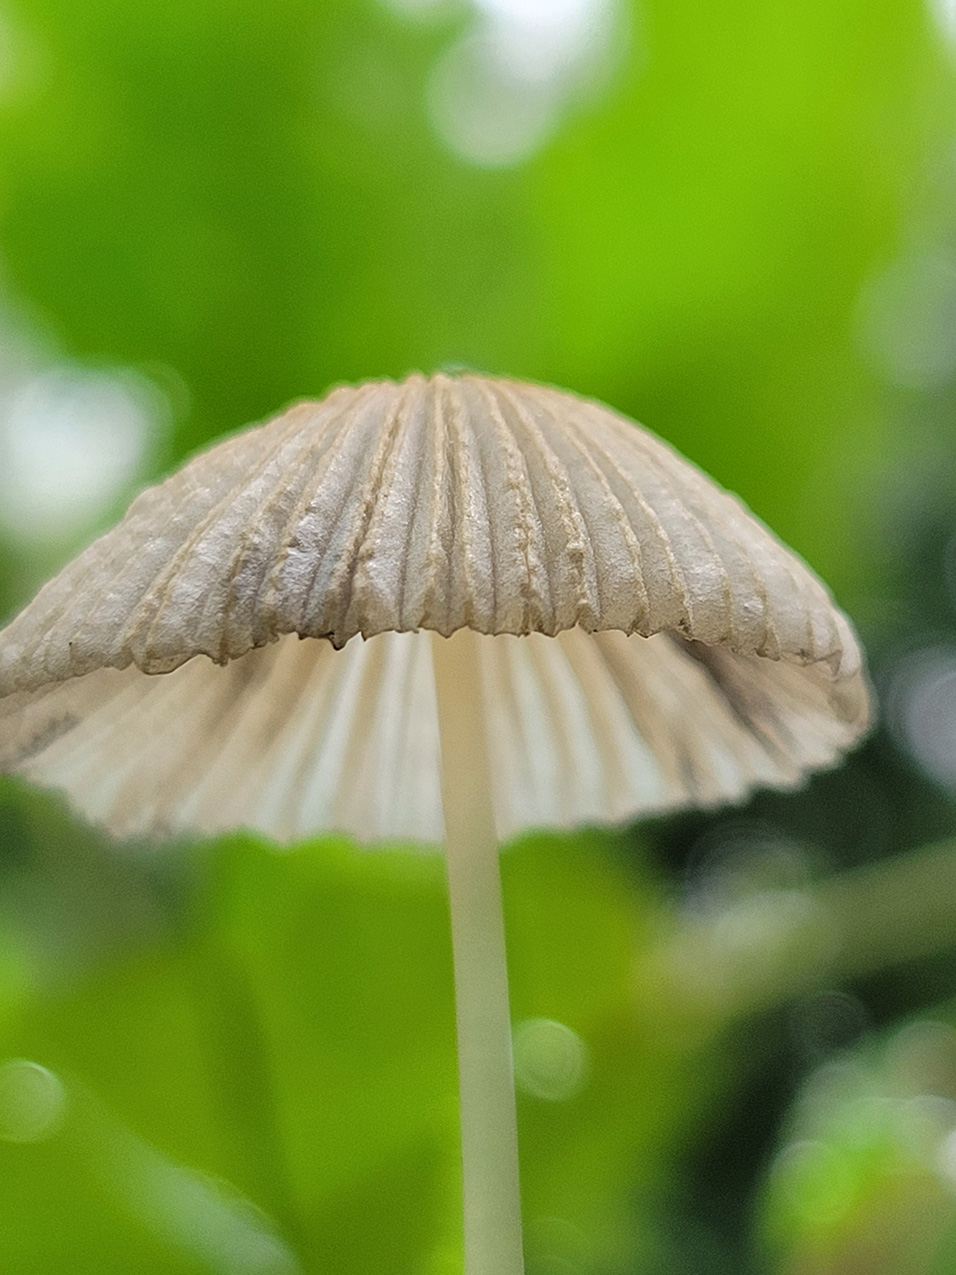 a single-stemmed tan mushroom with a delicate pleated cap; depth of field is very shallow and the background is a bright leaf green